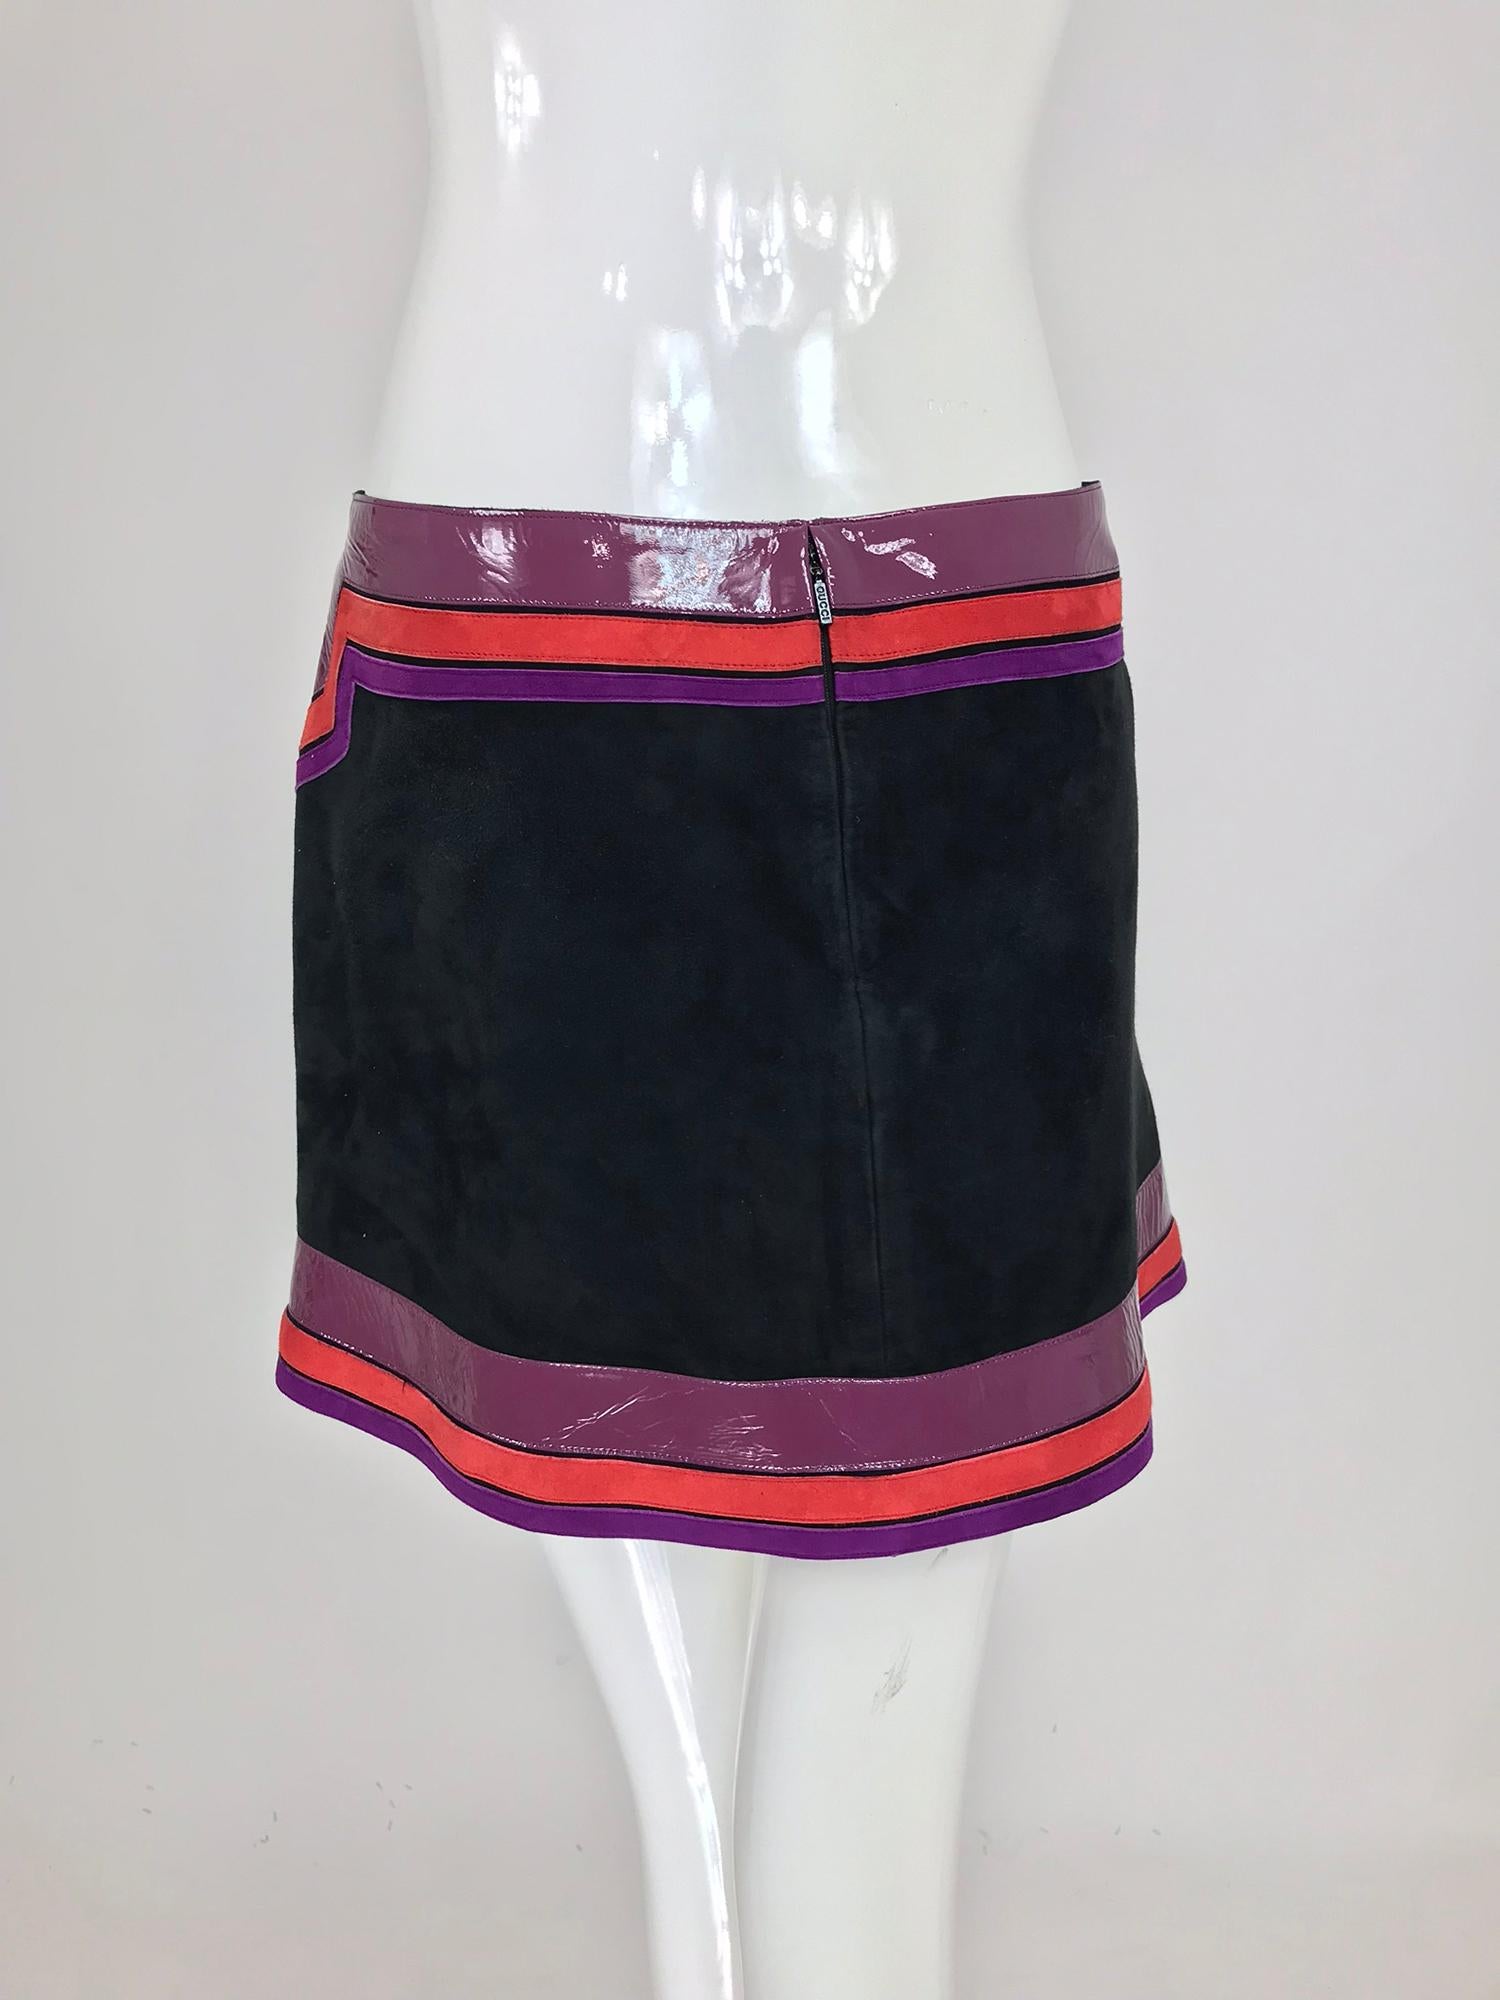 Gucci Black Suede Skirt Purple and Red Patent Leather Trim S/S 2007  1